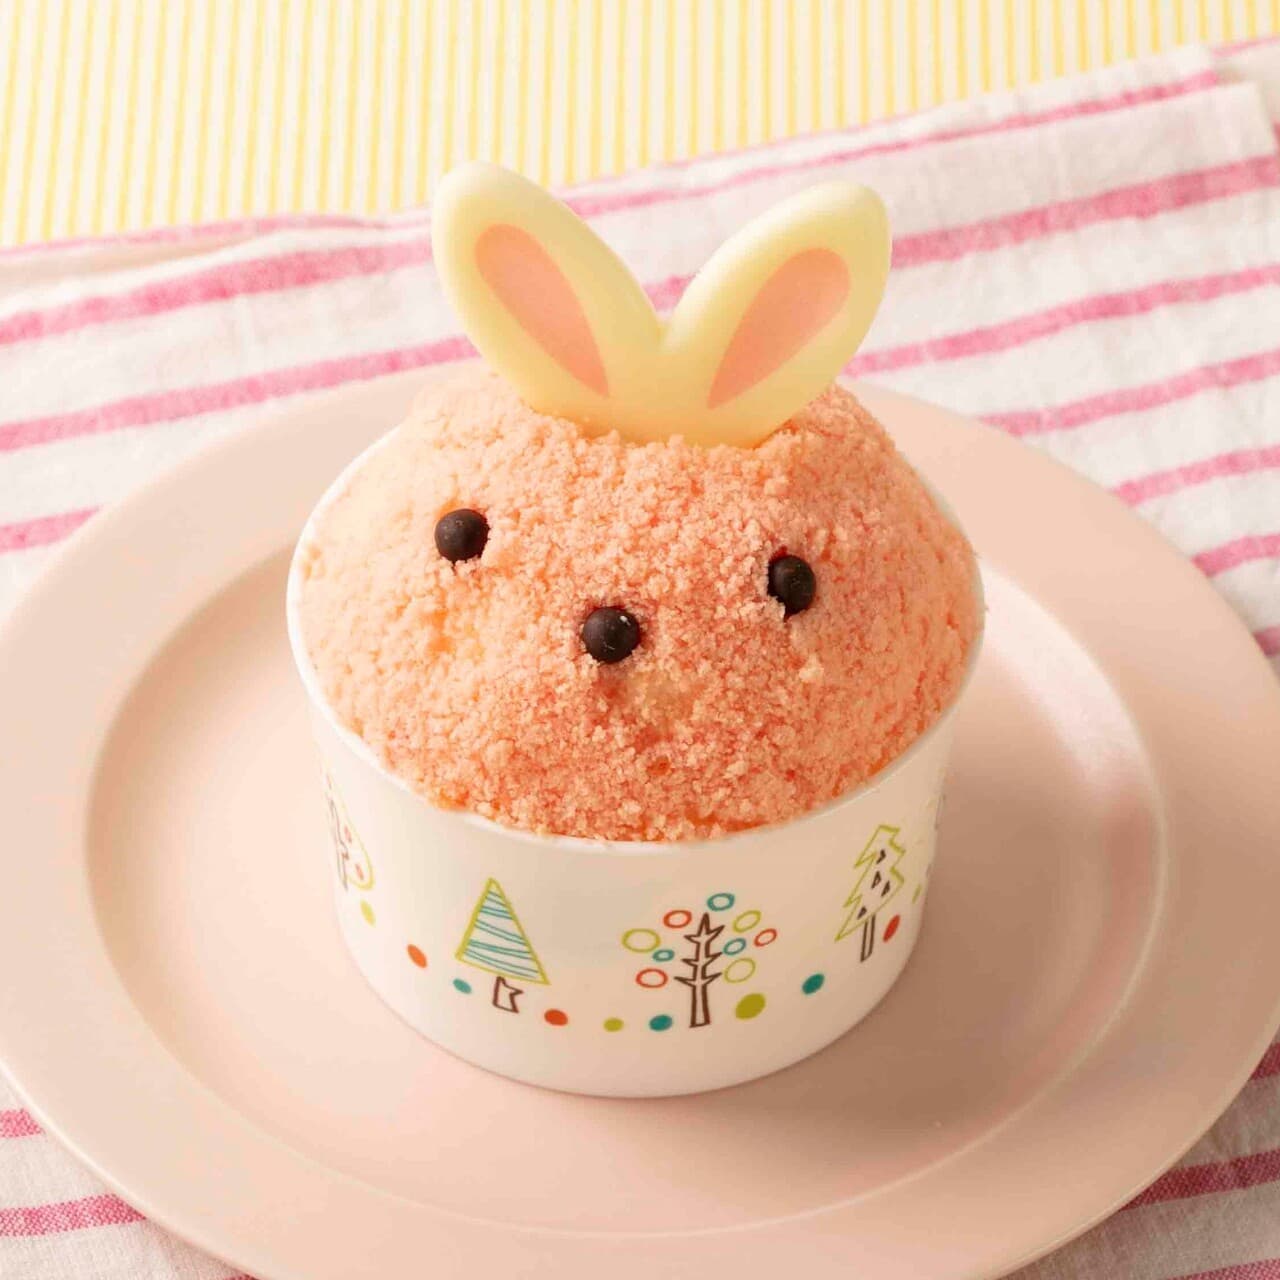 Shateraise "Easter Cute Bunny